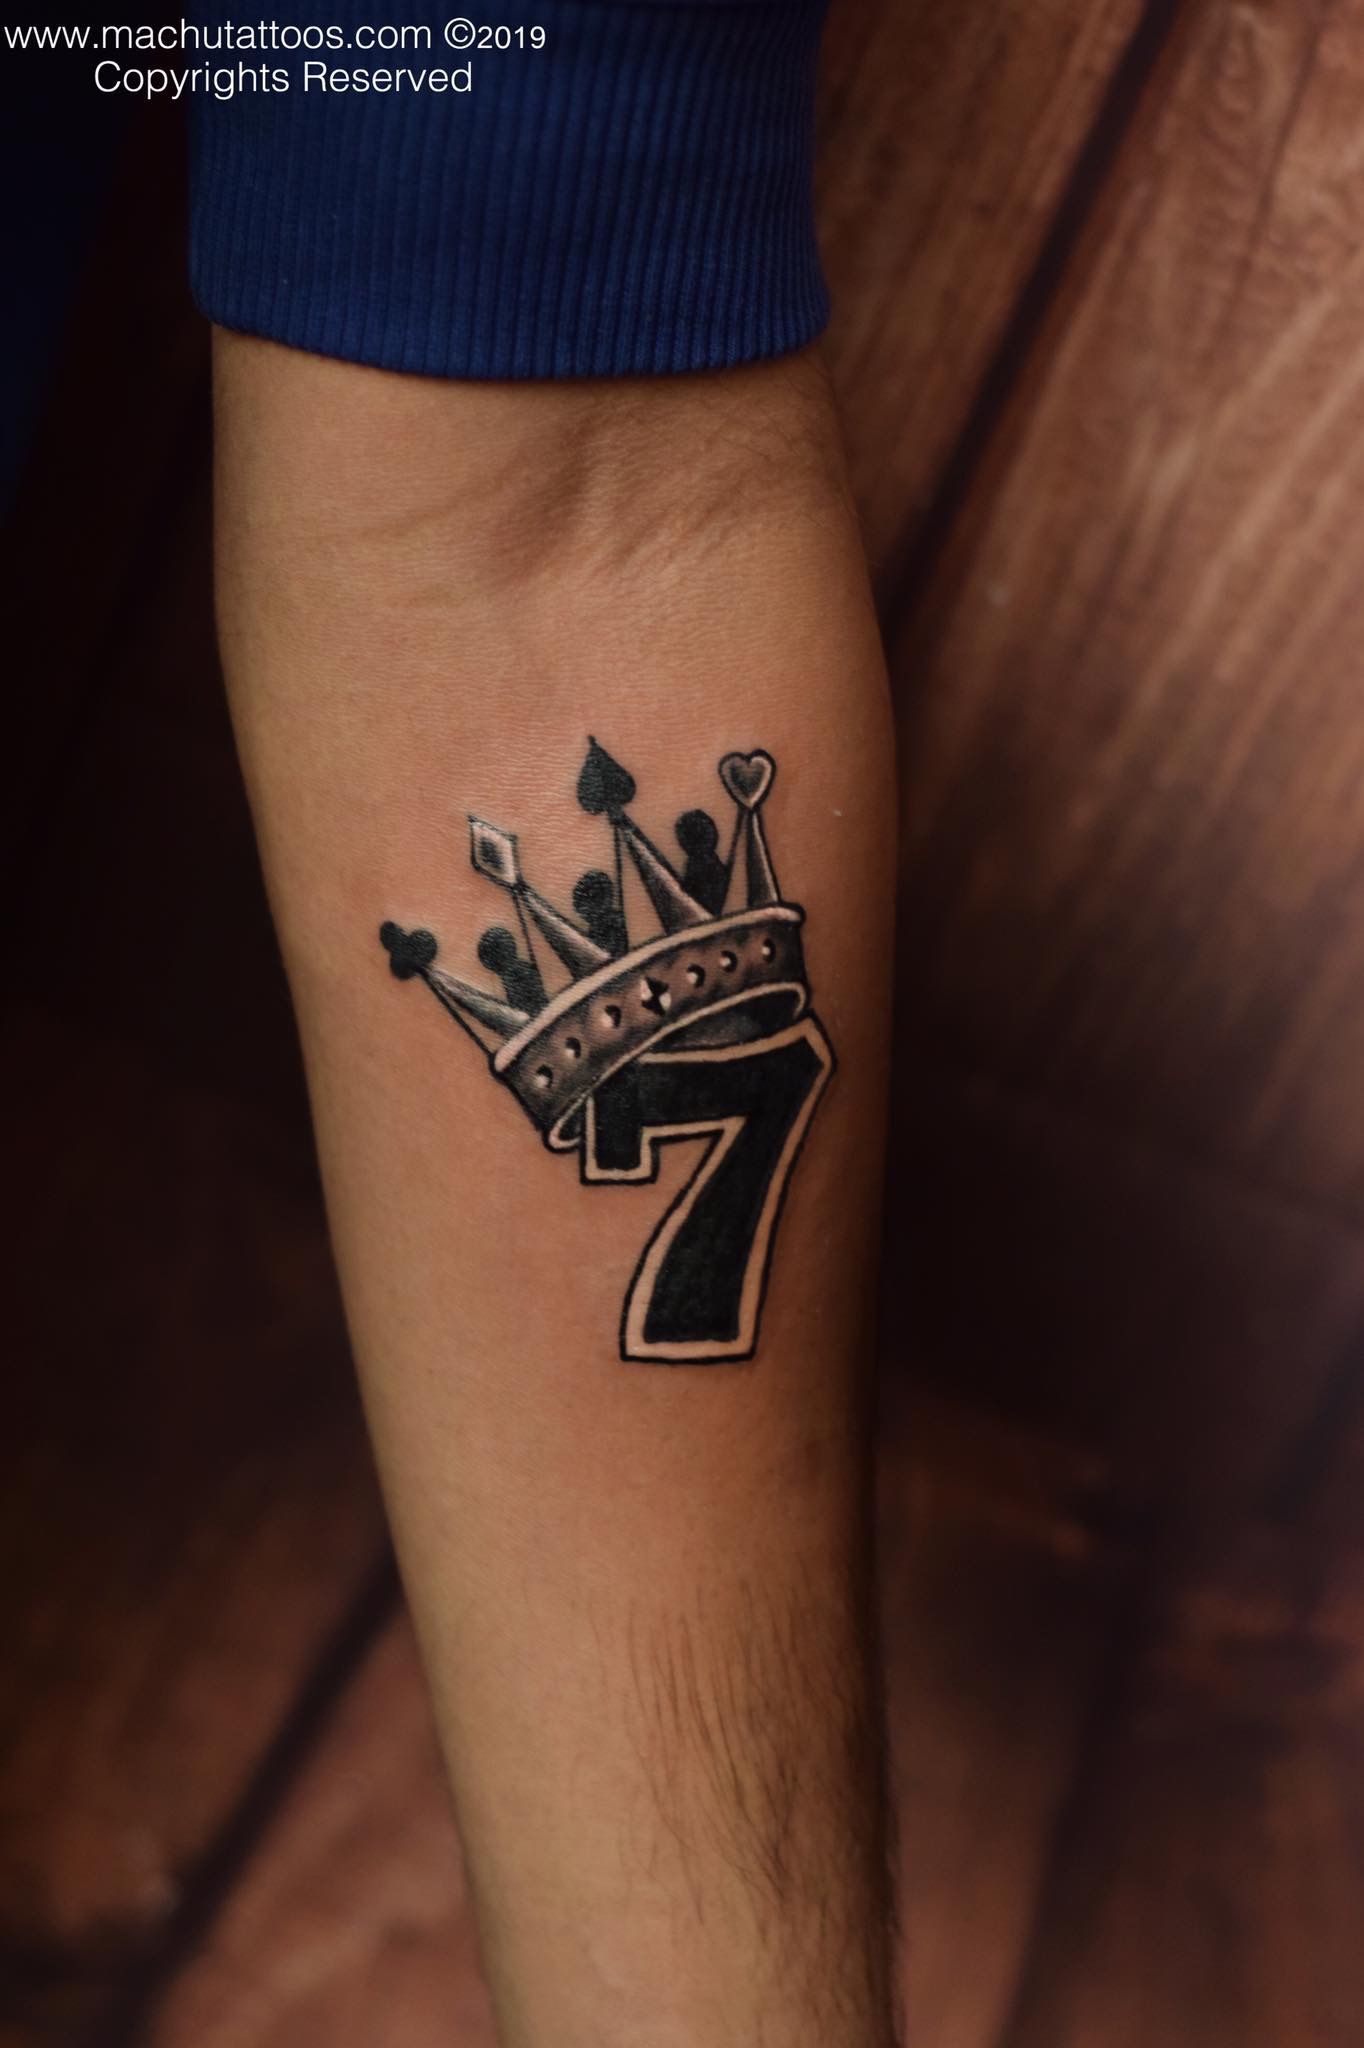 5 Point Crown Tattoo Meaning: Personal Stories and Symbolism Behind Body Art